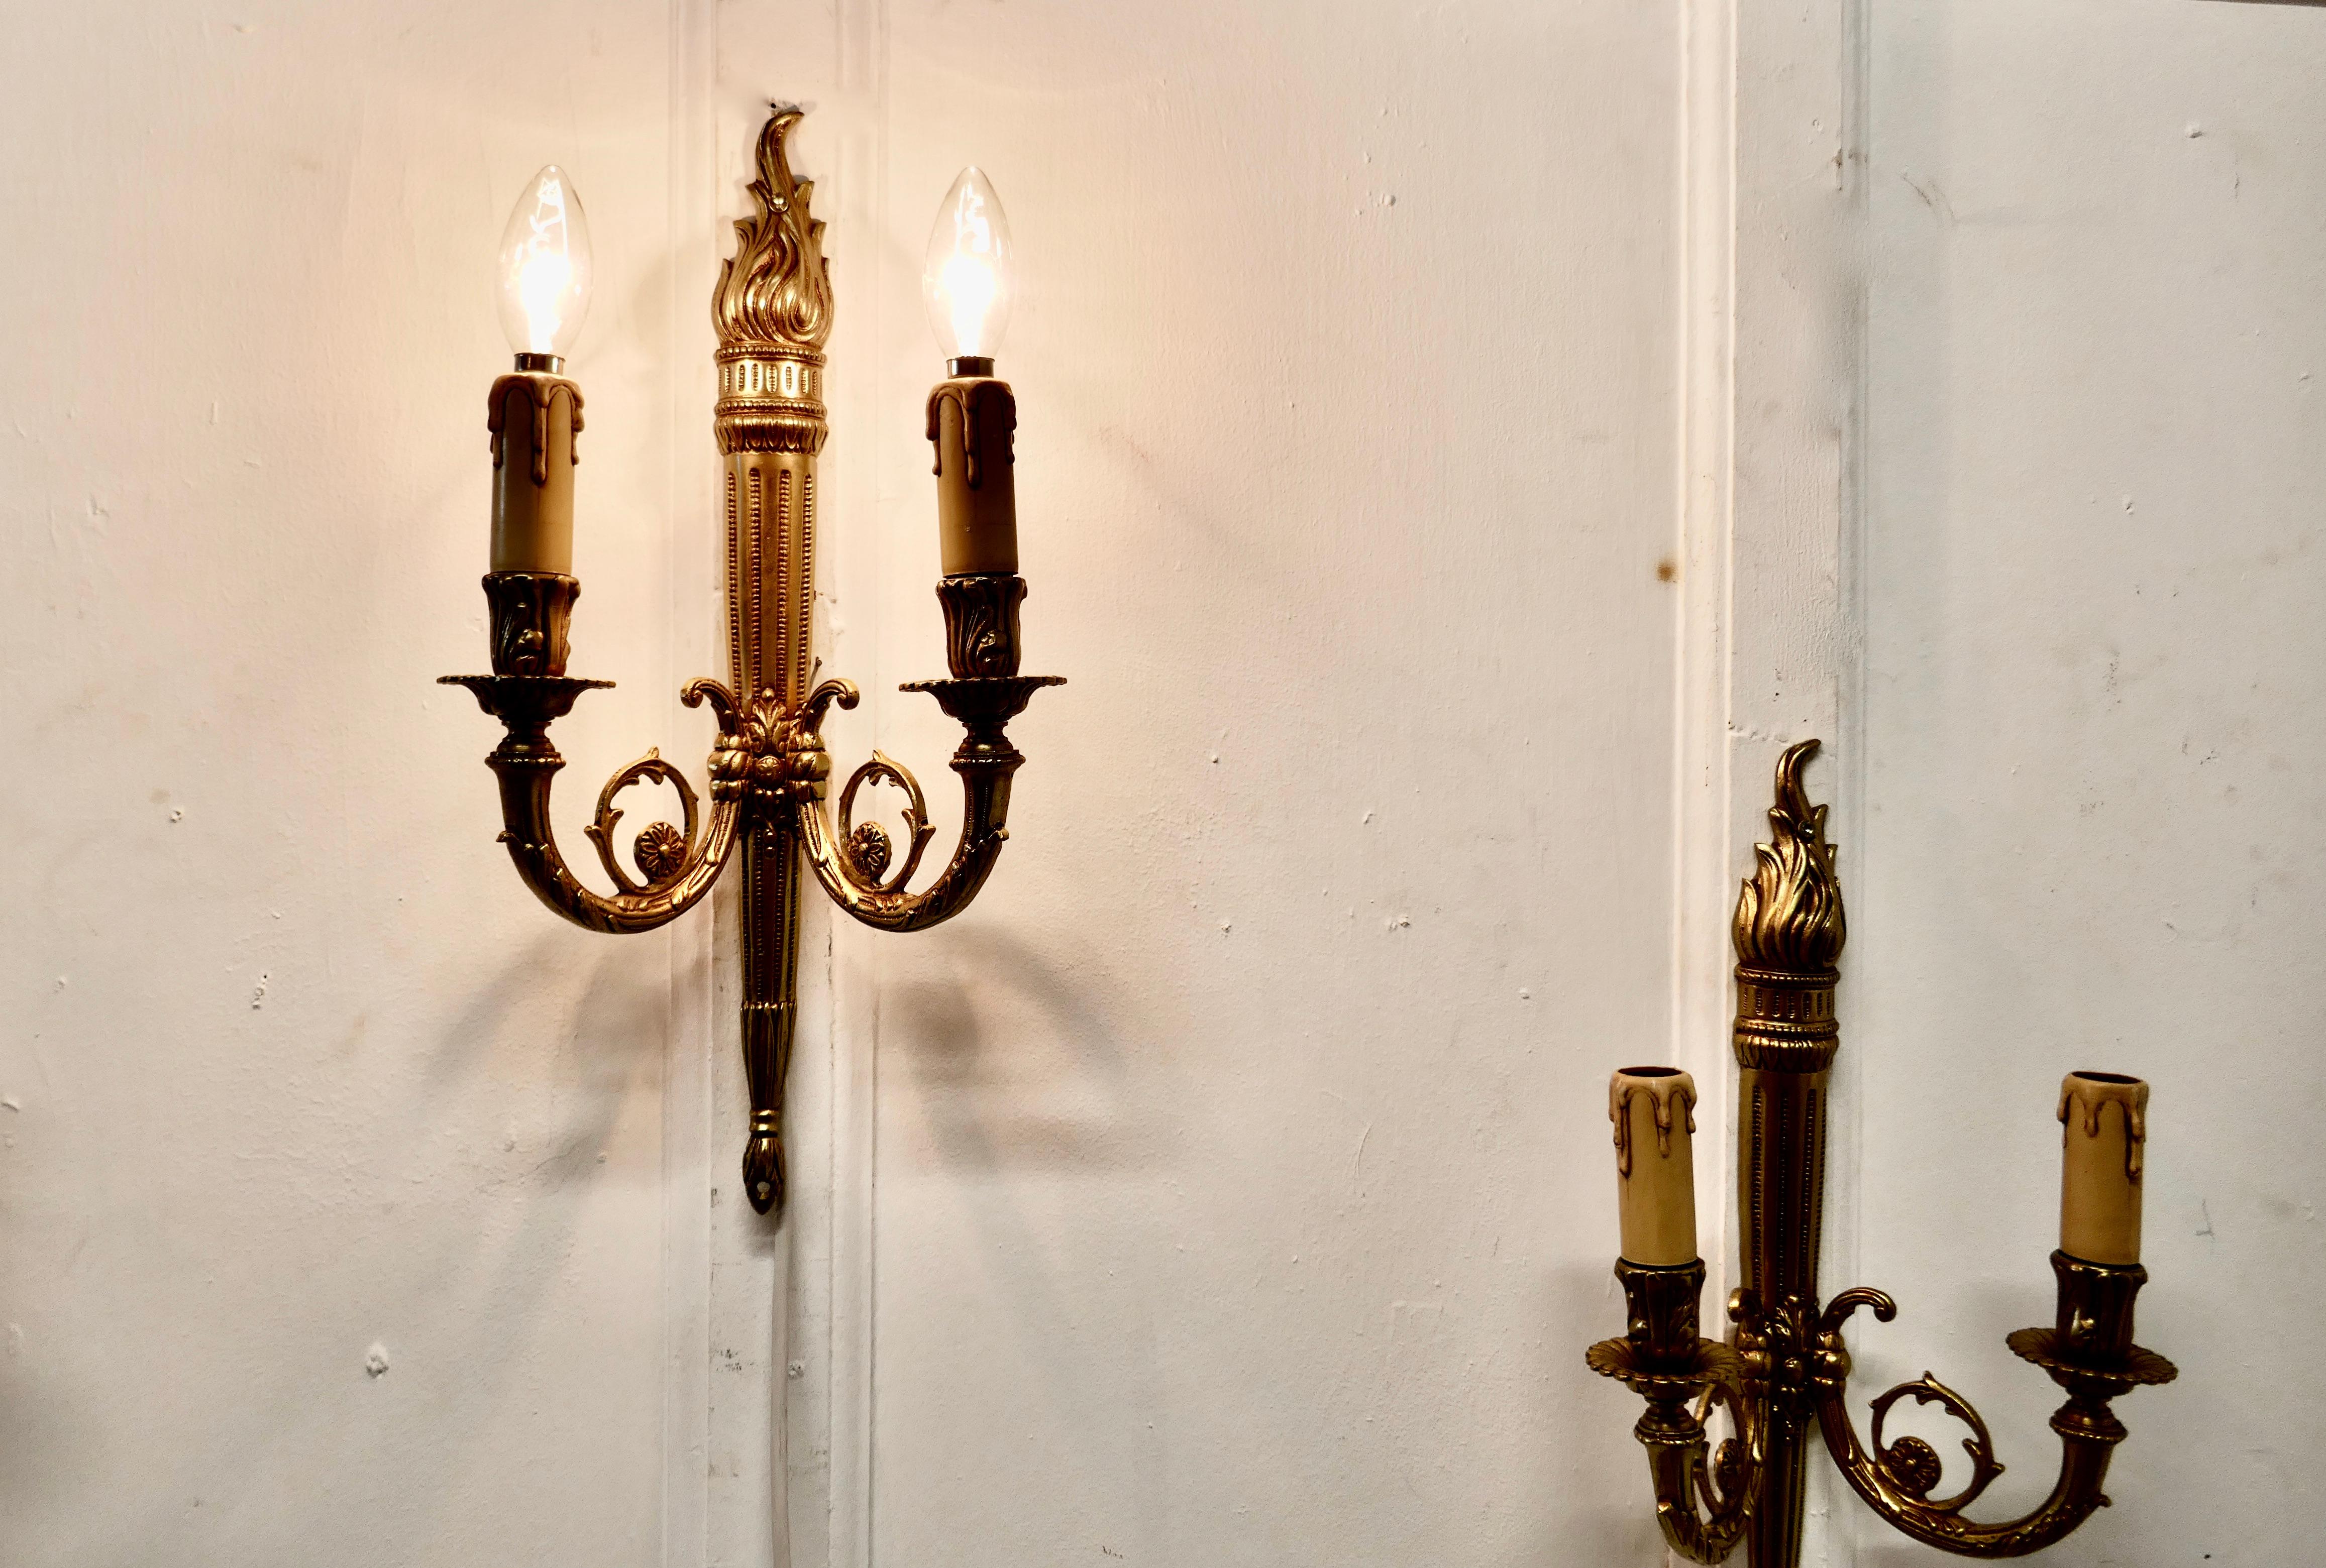 Set of French neoclassical large brass twin wall lights


A very handsome set of large heavy brass wall lights, the lights are in the classical style of a lighted torch with acanthus leaf scroll branches
Each light has 2 branches each with a